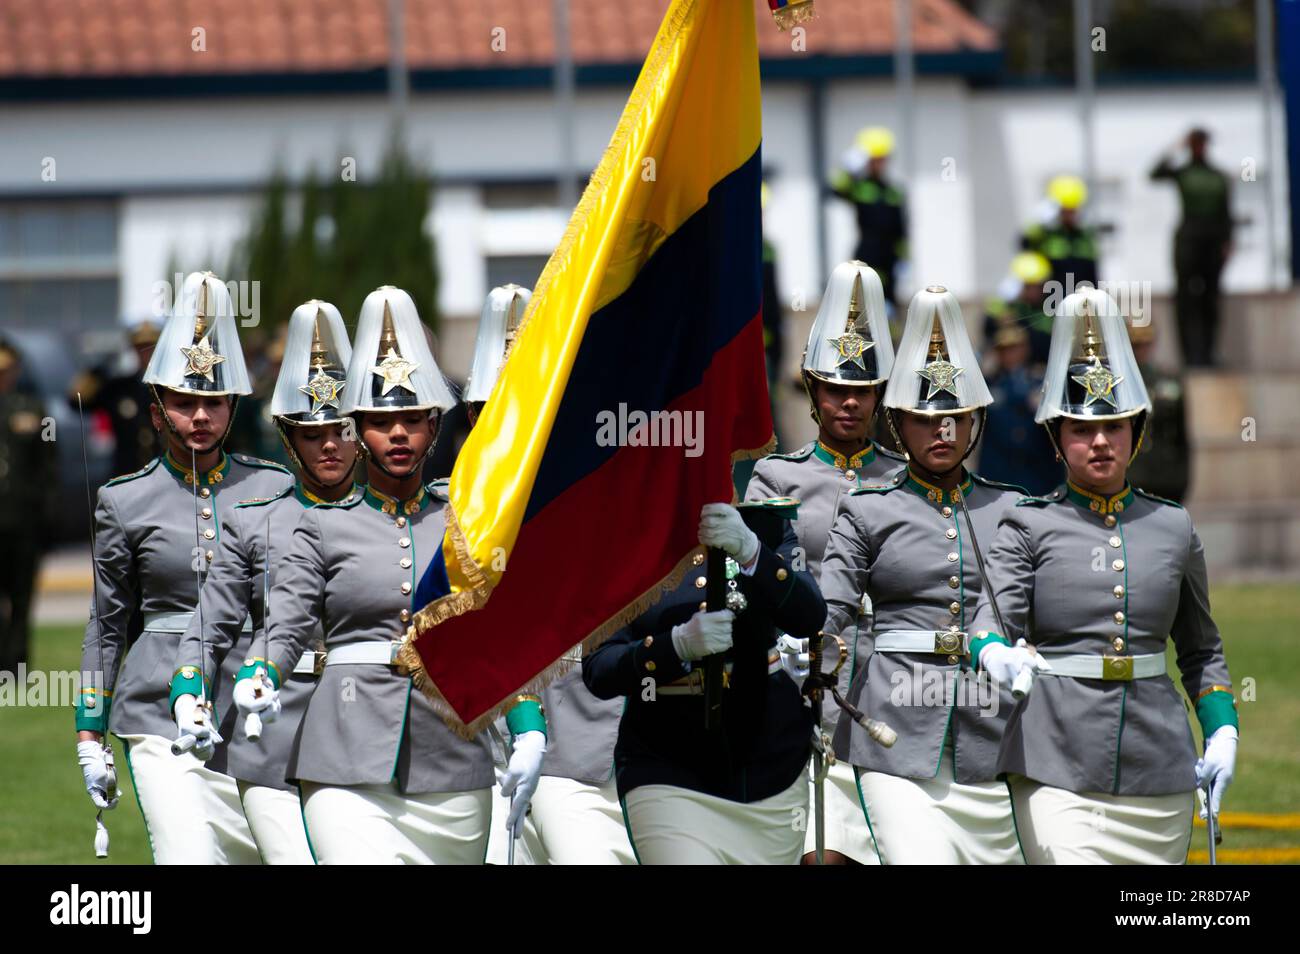 Bogota, Colombia. 20th June, 2023. Colombian police cadets parade during the promotion to general of the Police Director William Rene Salamanca, at the General Santander Police Academy in Bogota, Colombia on June 20, 2023. Photo by: Chepa Beltran/Long Visual Press Credit: Long Visual Press/Alamy Live News Stock Photo